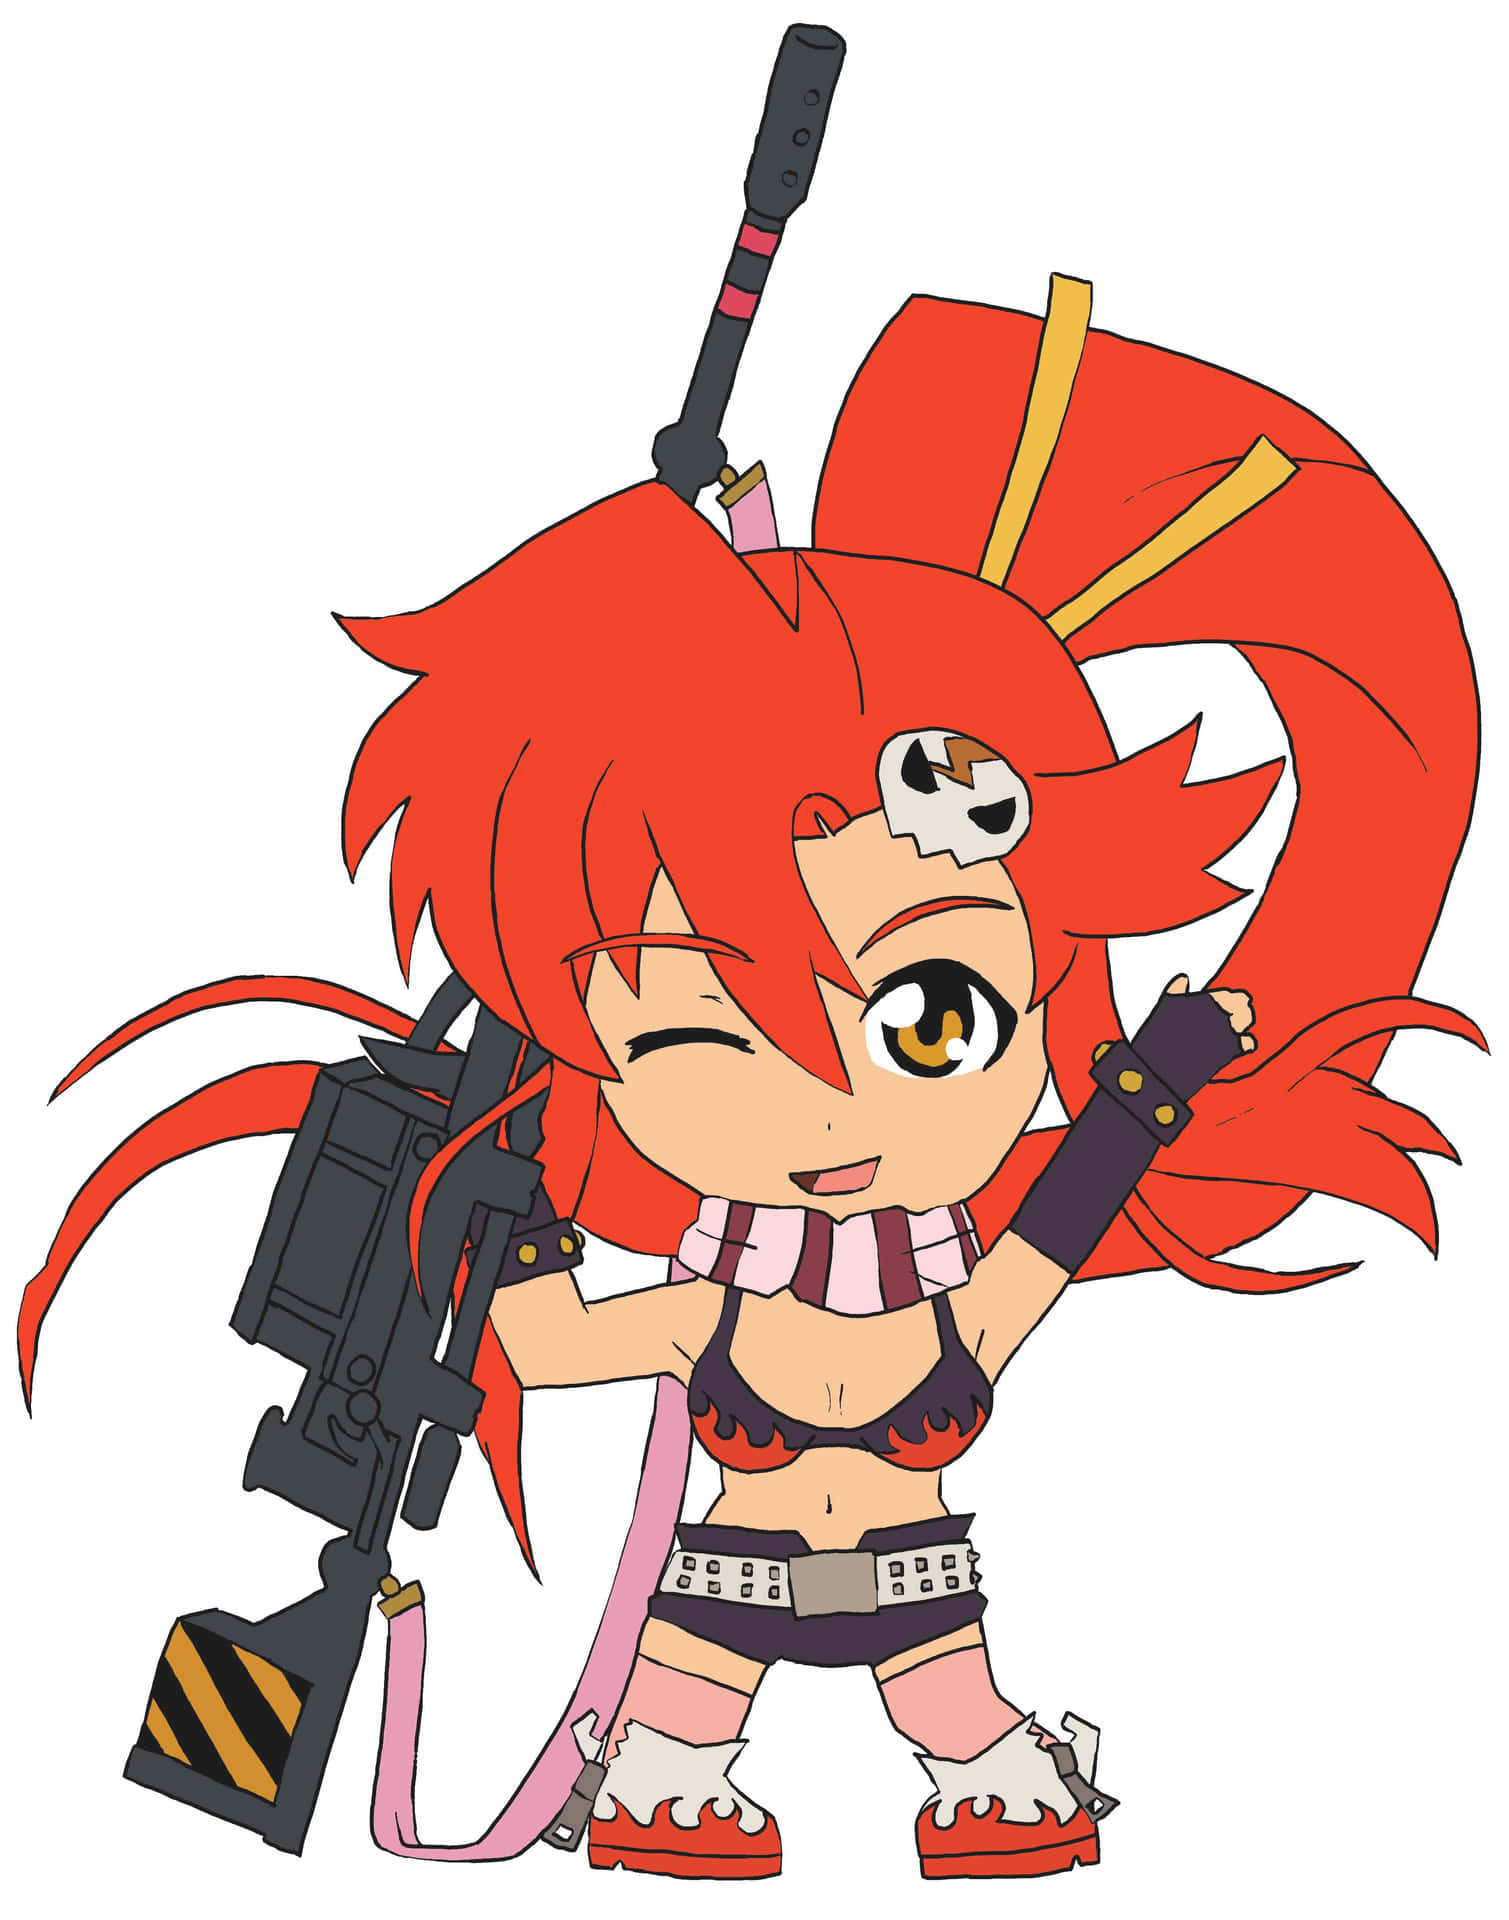 Stunning artwork of Yoko Littner in her iconic outfit with a fiery background. Wallpaper